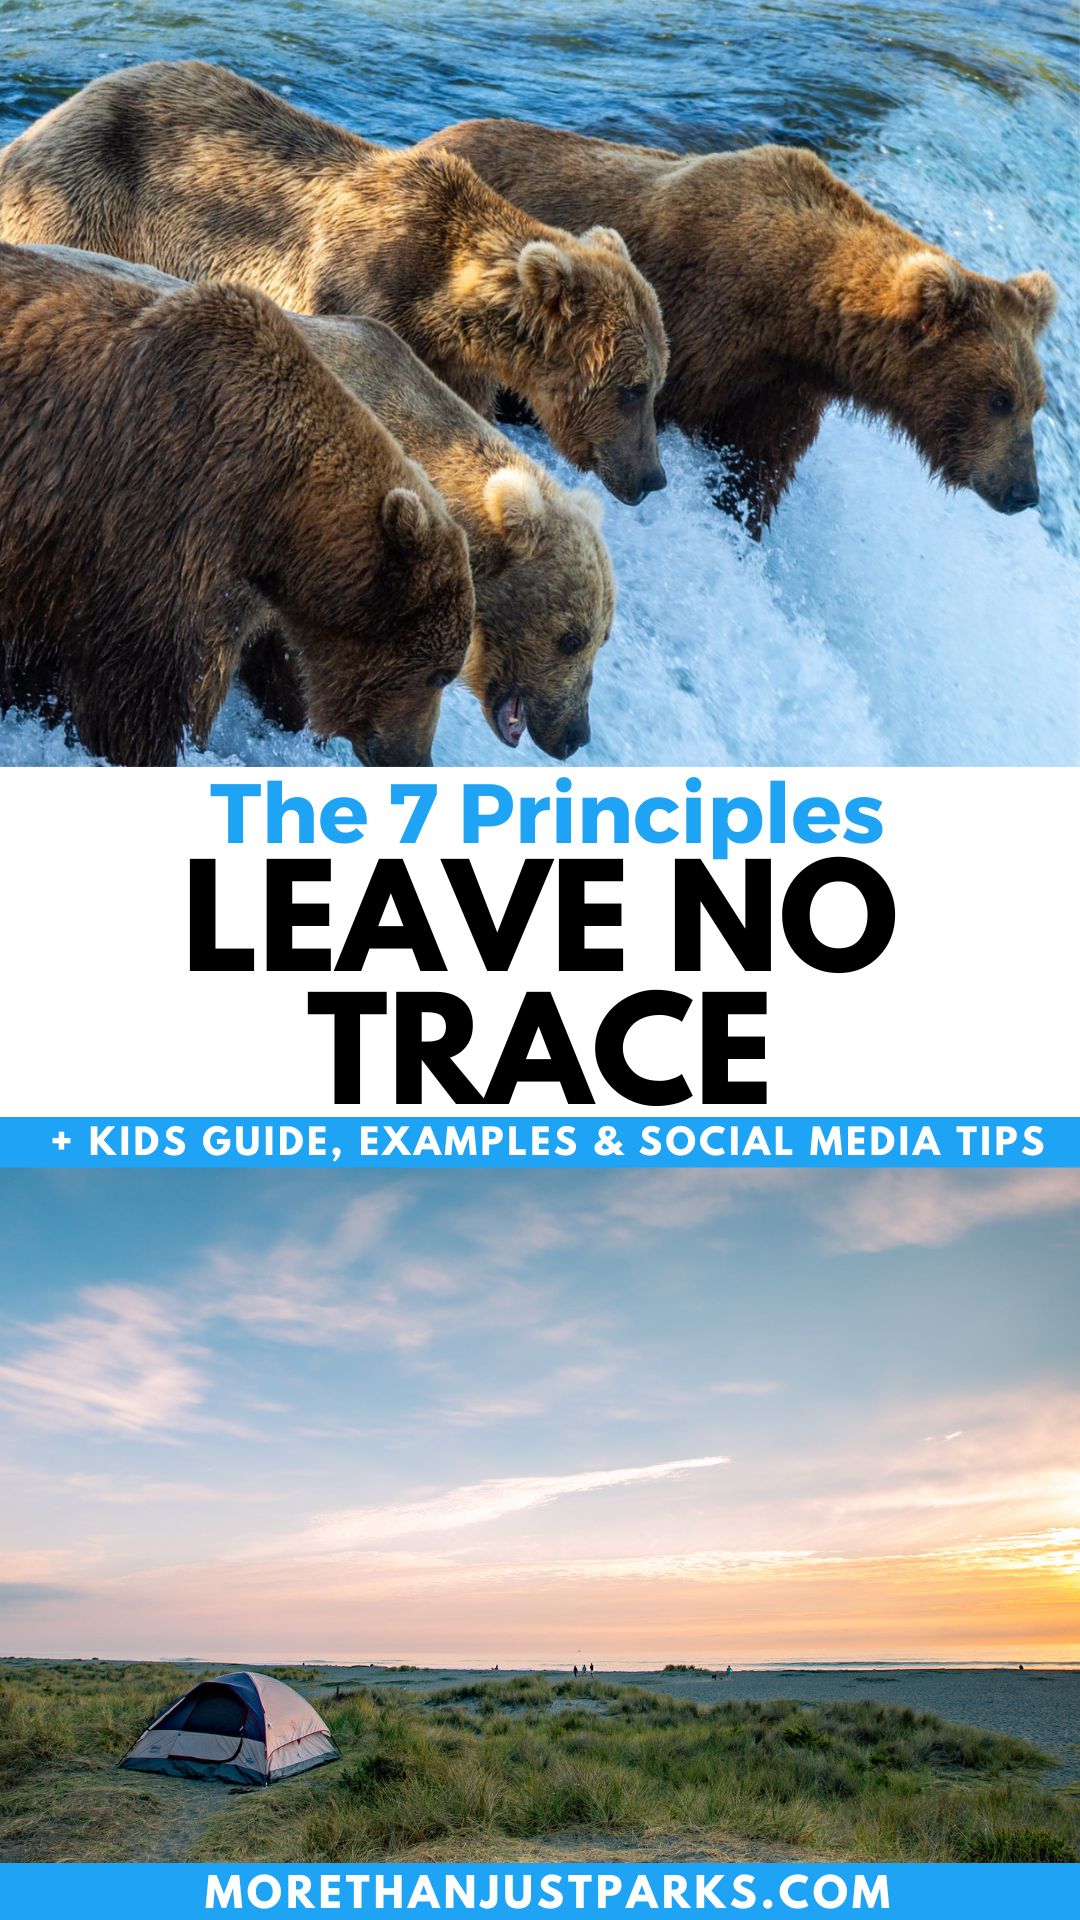 The 7 Principles Leave No Trace Graphic (Kids Guide, Examples, and Social Media Tips)